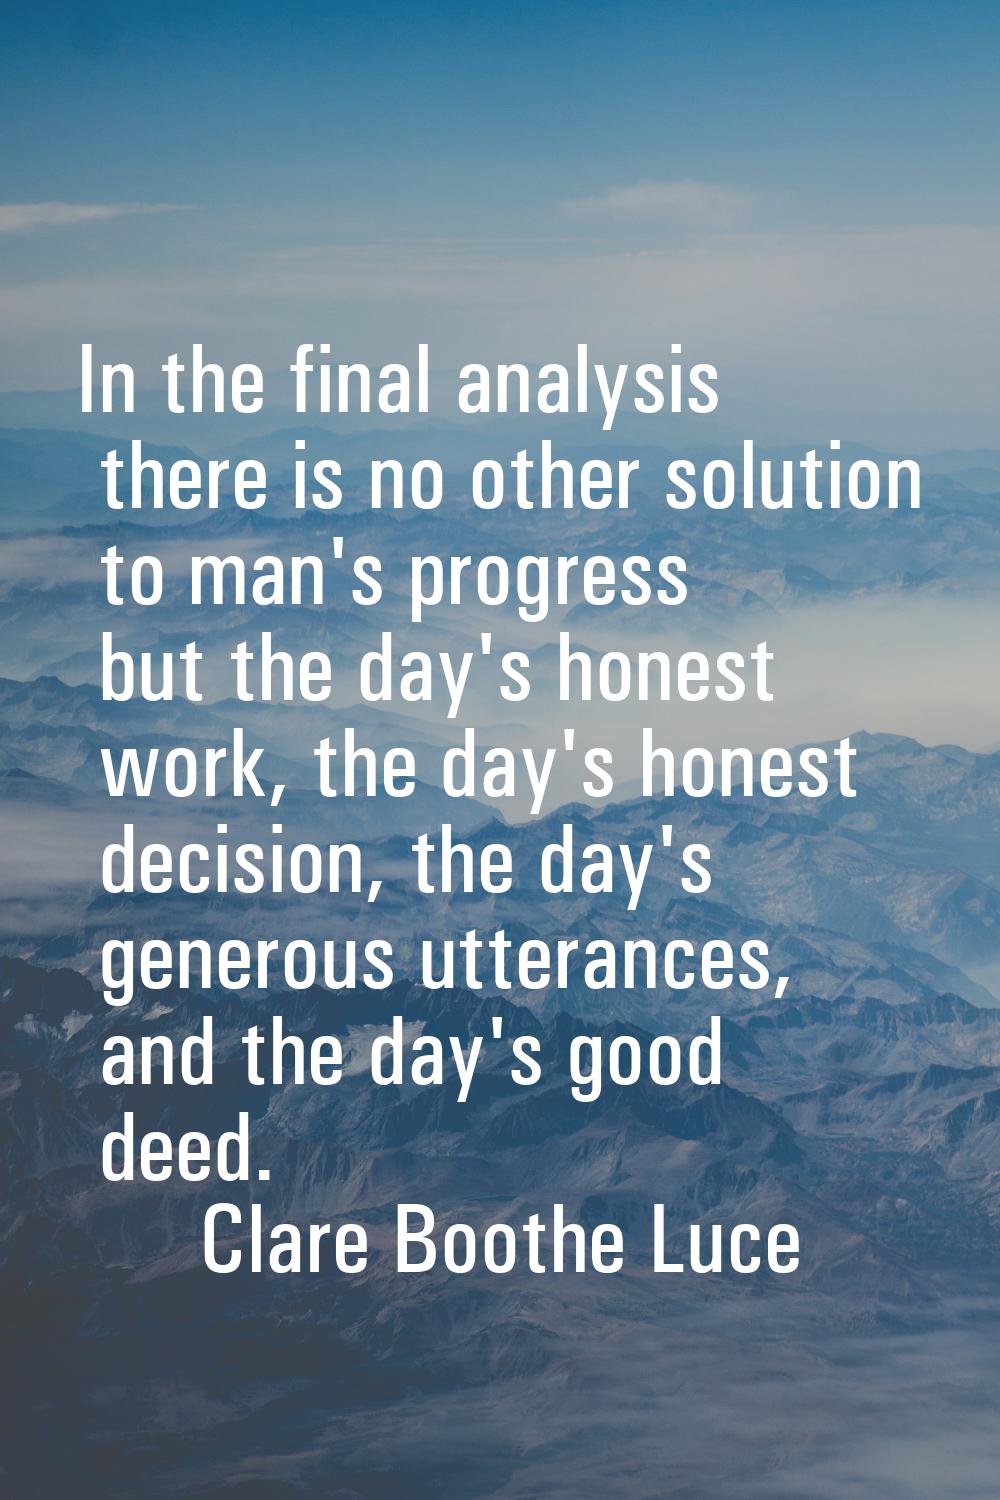 In the final analysis there is no other solution to man's progress but the day's honest work, the d